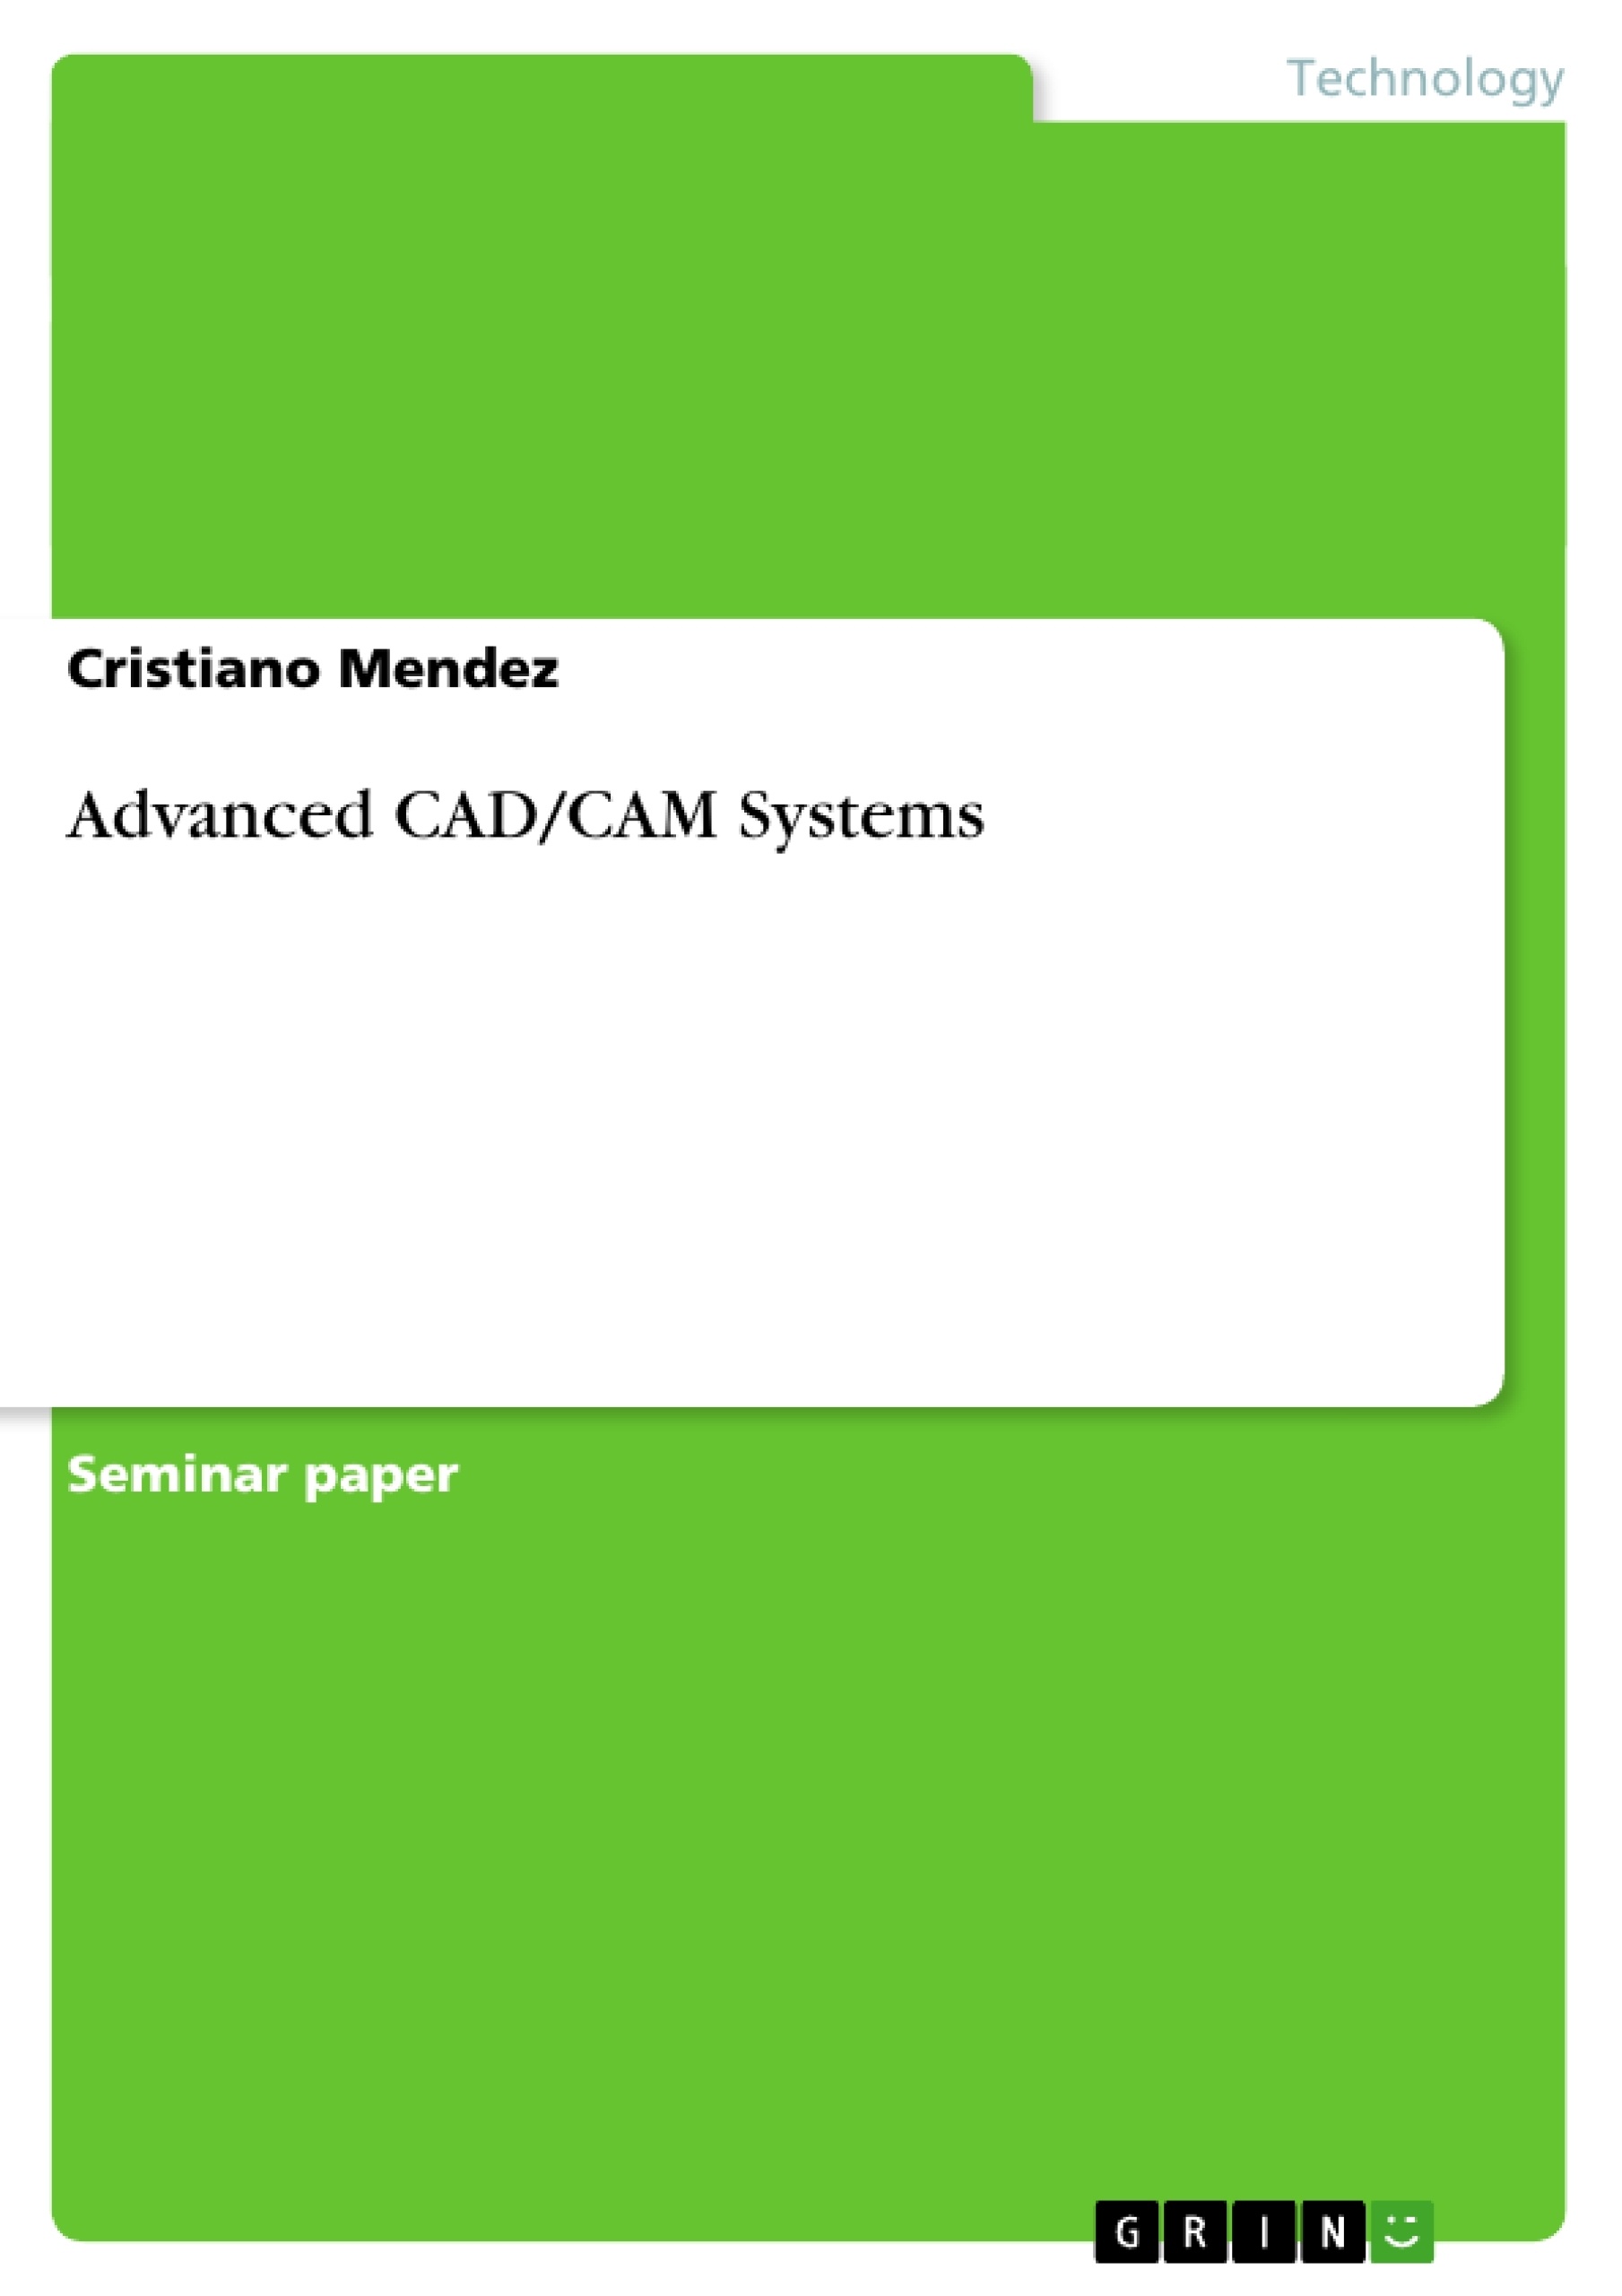 Title: Advanced CAD/CAM Systems